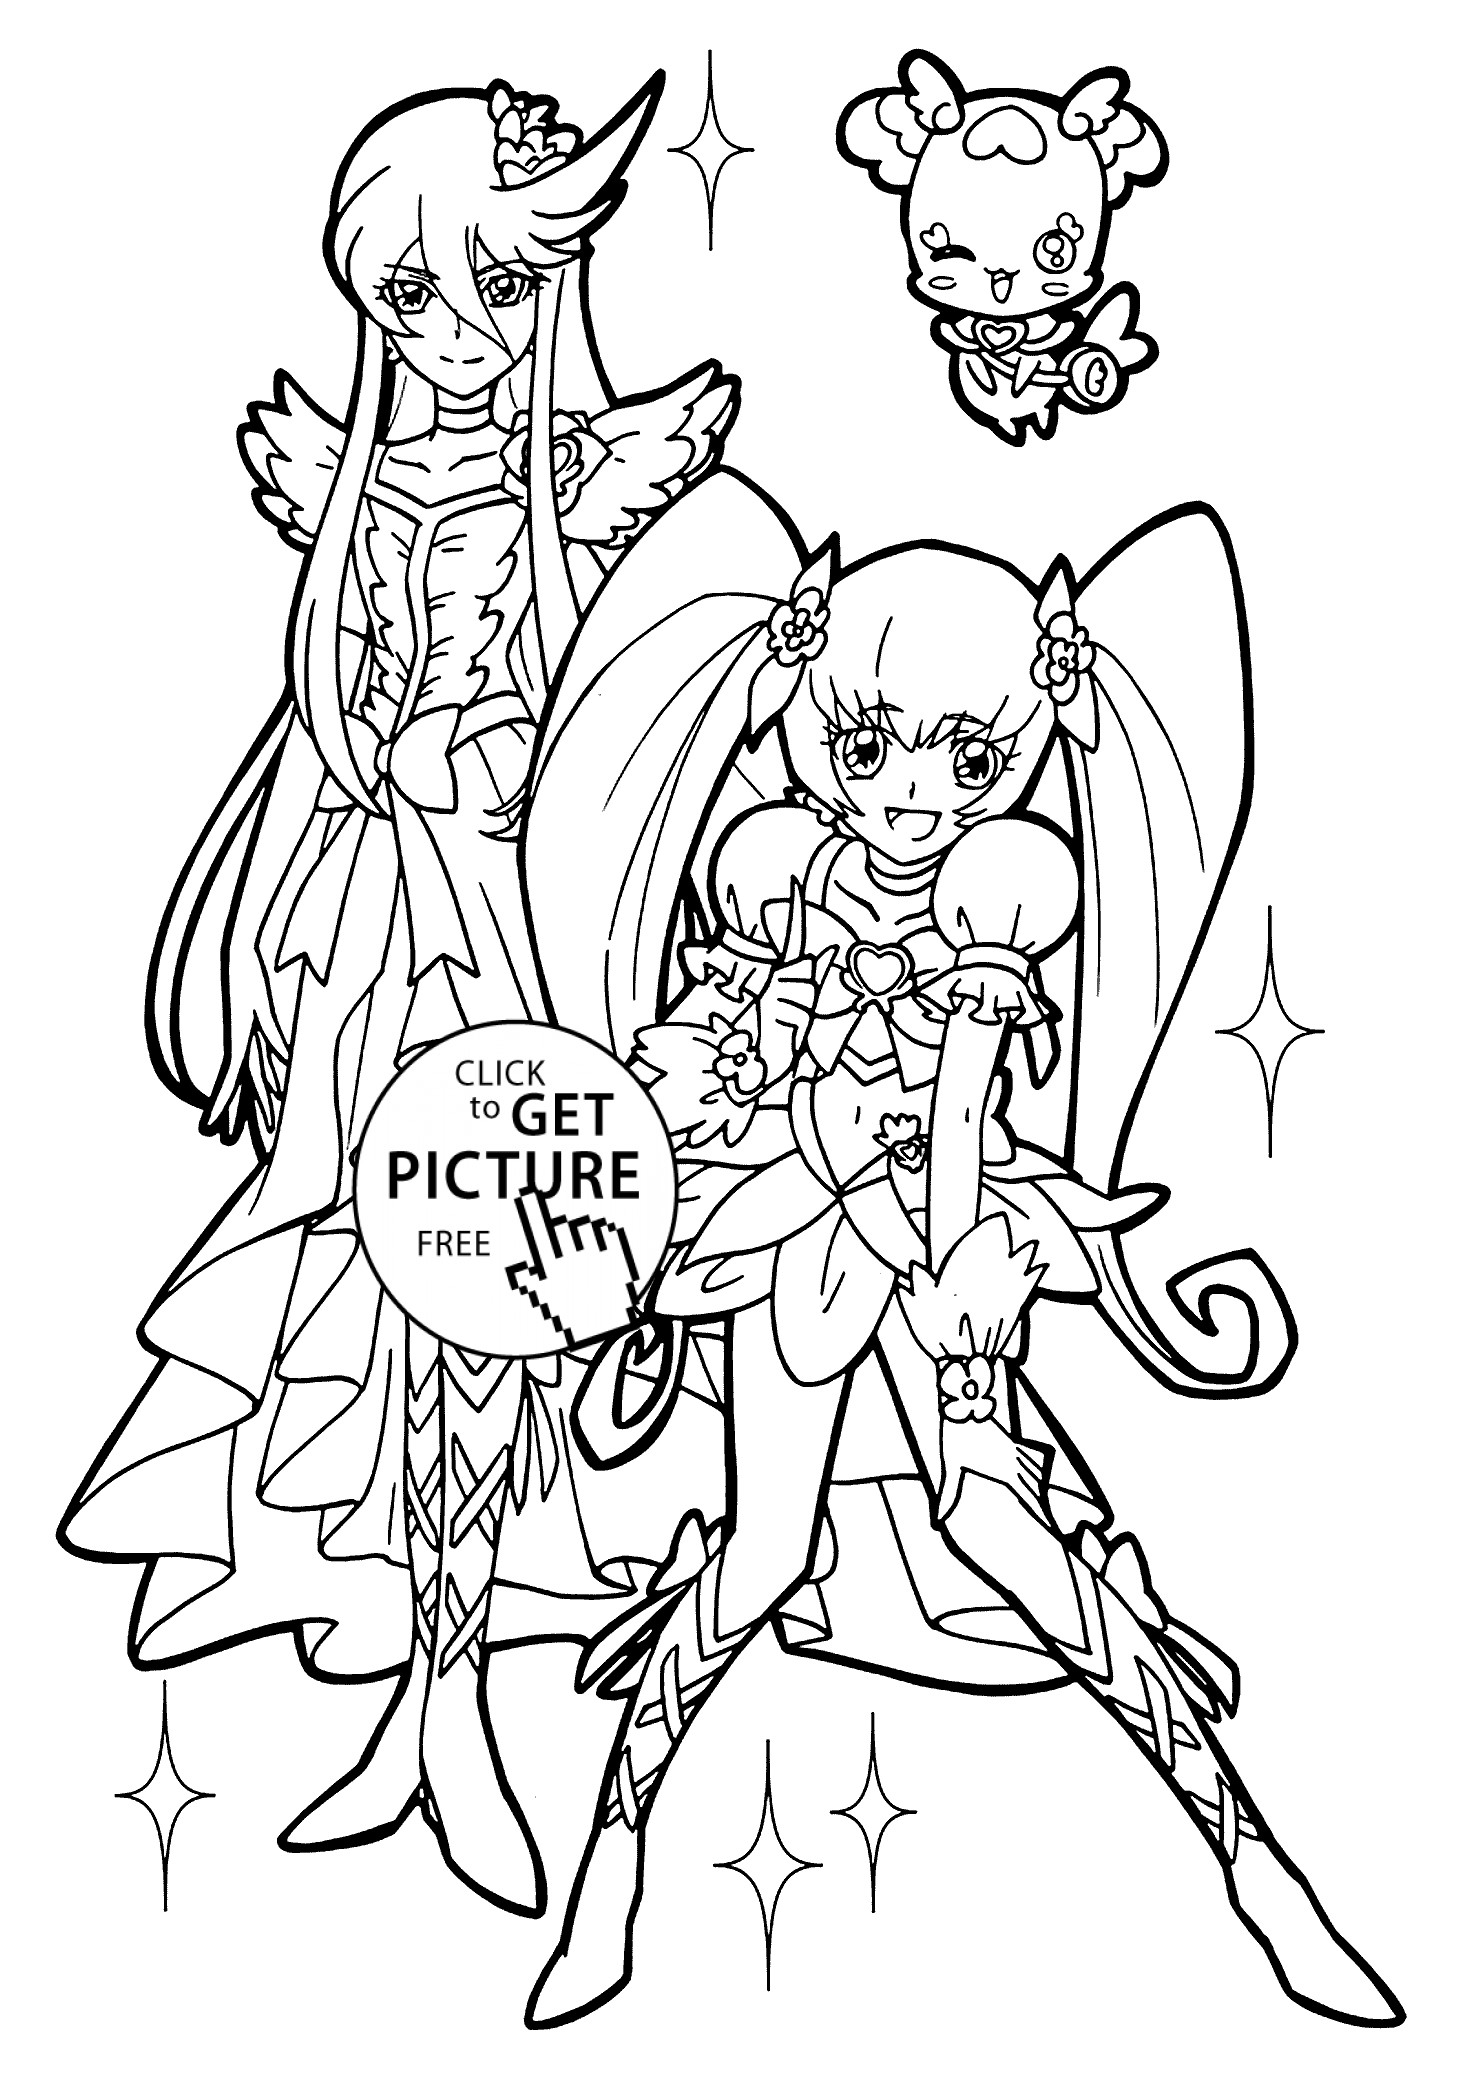 Pretty Girl Coloring Pages To Print
 Nice girl from Pretty cure coloring pages for kids